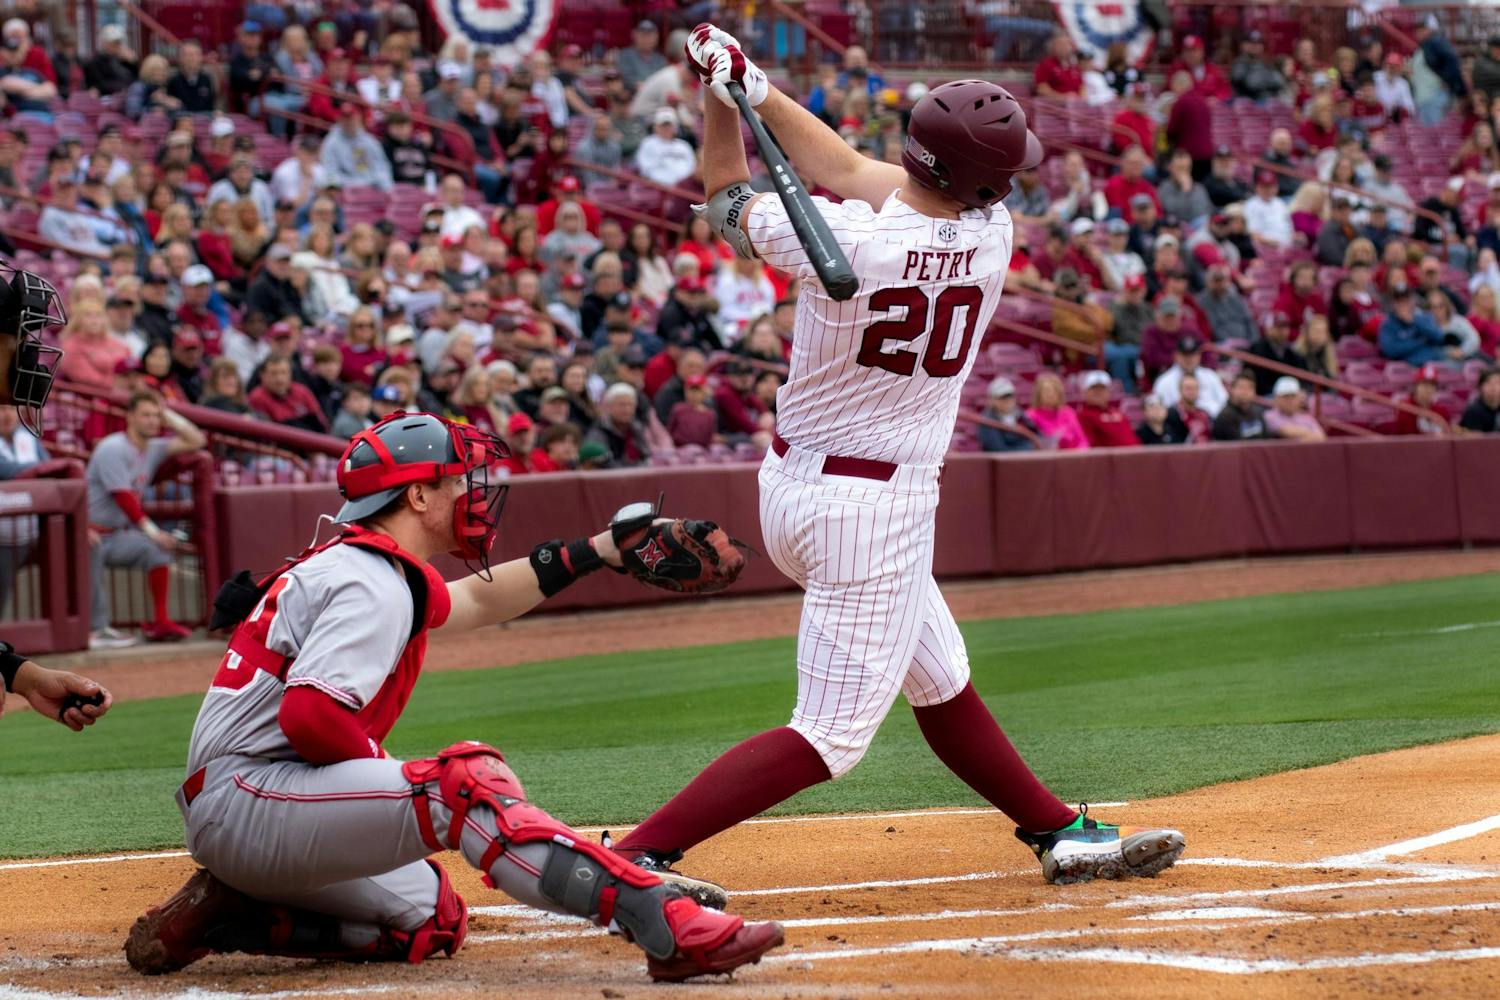 The South Carolina baseball team swept its opening series against Miami-Ohio on Feb. 16, 17 and 18, 2024, at Founders Park. The ɫɫƵs started the weekend with a 5-1 victory, followed by high scoring wins of 11-4 and 14-0. The team is ranked No. 25 in the nation.